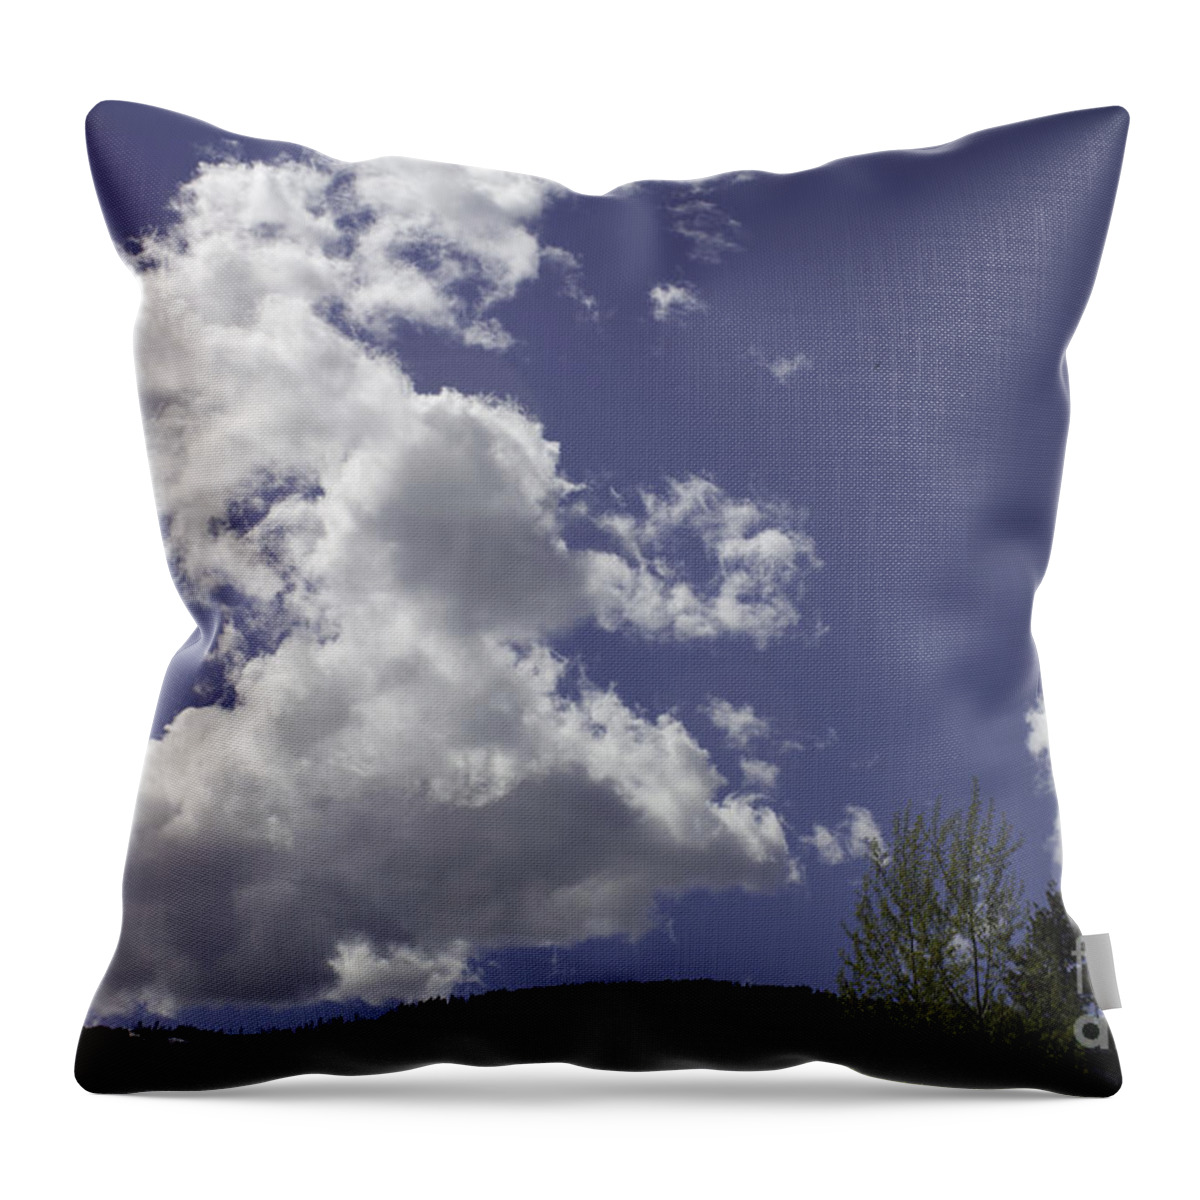 Salmon Arm Throw Pillow featuring the photograph Clouds Beckoning by Donna L Munro